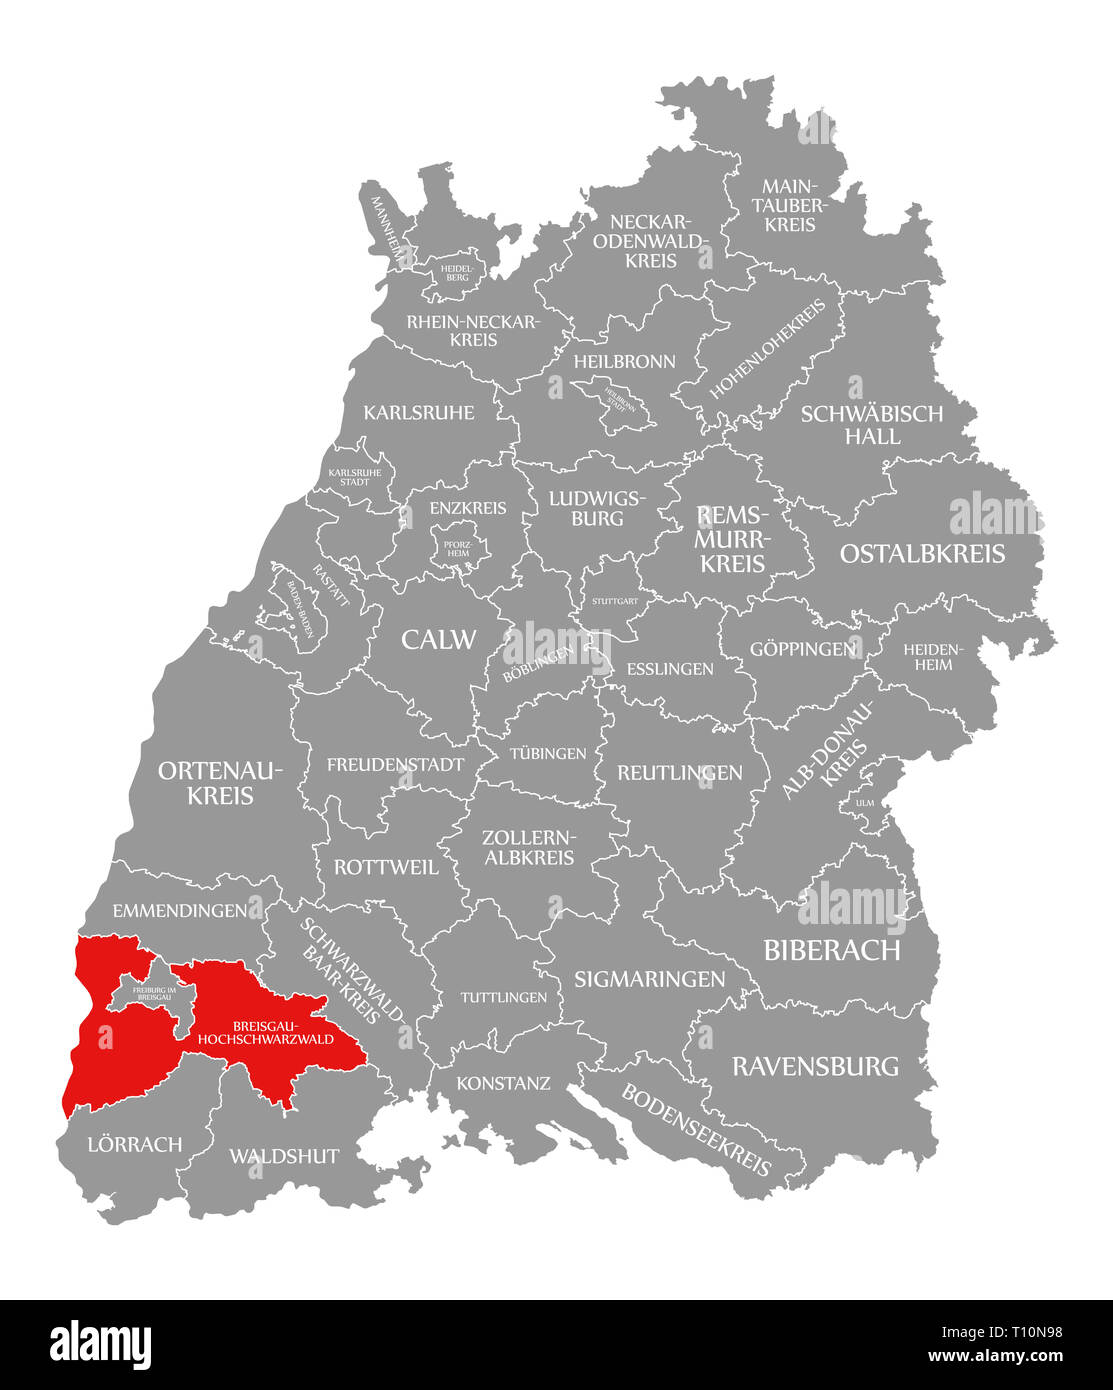 Breisgau-Hochschwarzwald county red highlighted in map of Baden Wuerttemberg Germany Stock Photo